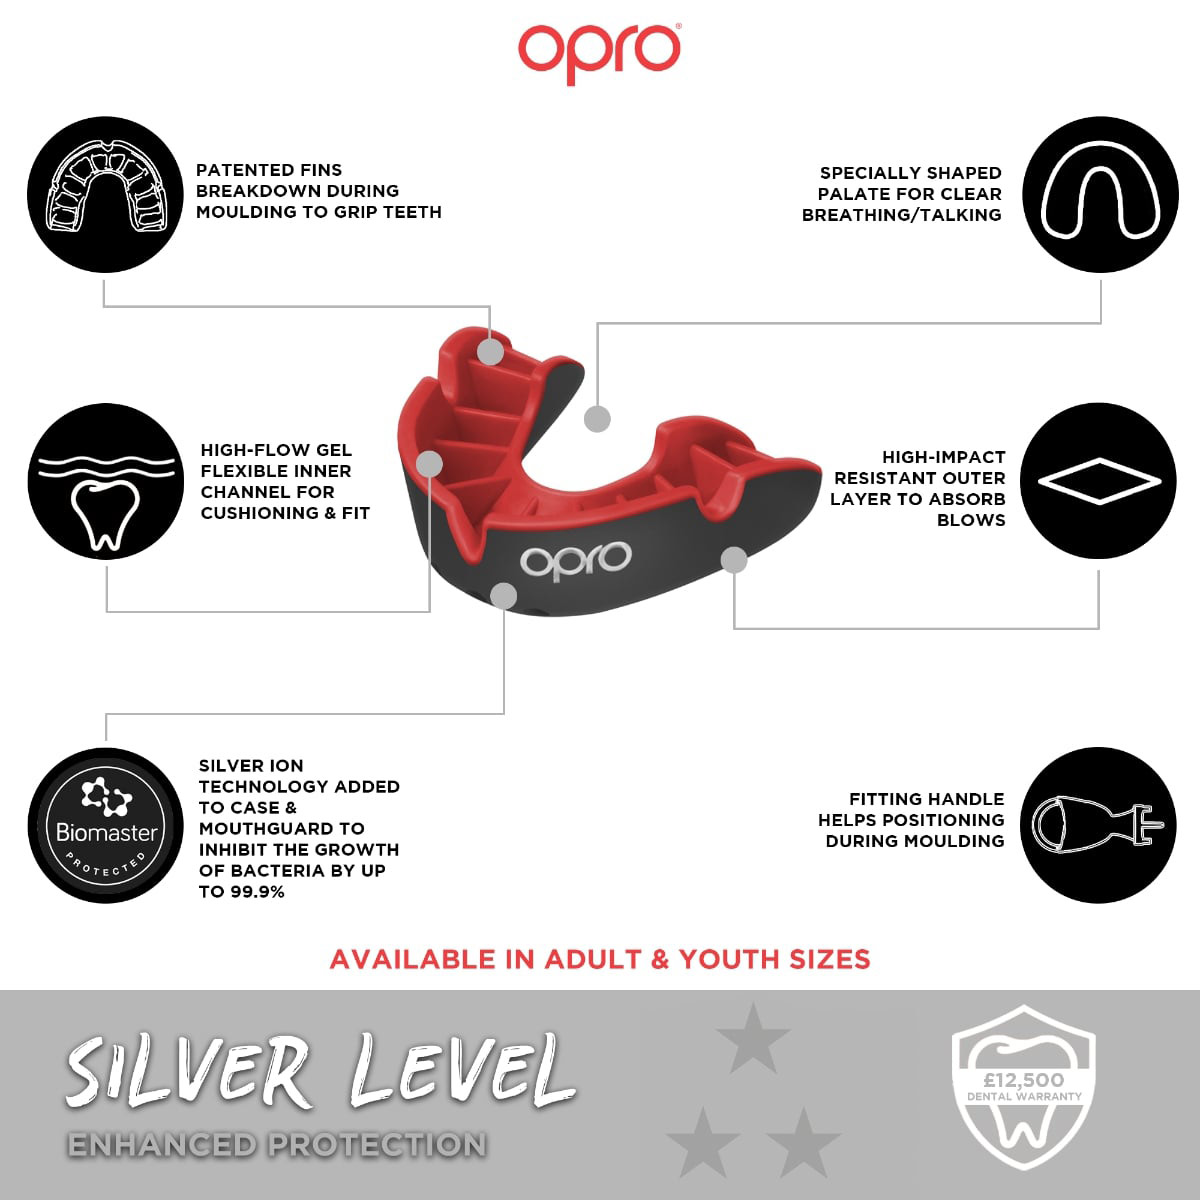 OPRO SELF-FIT JUNIOR MOUTHGUARD - SILVER LEVEL